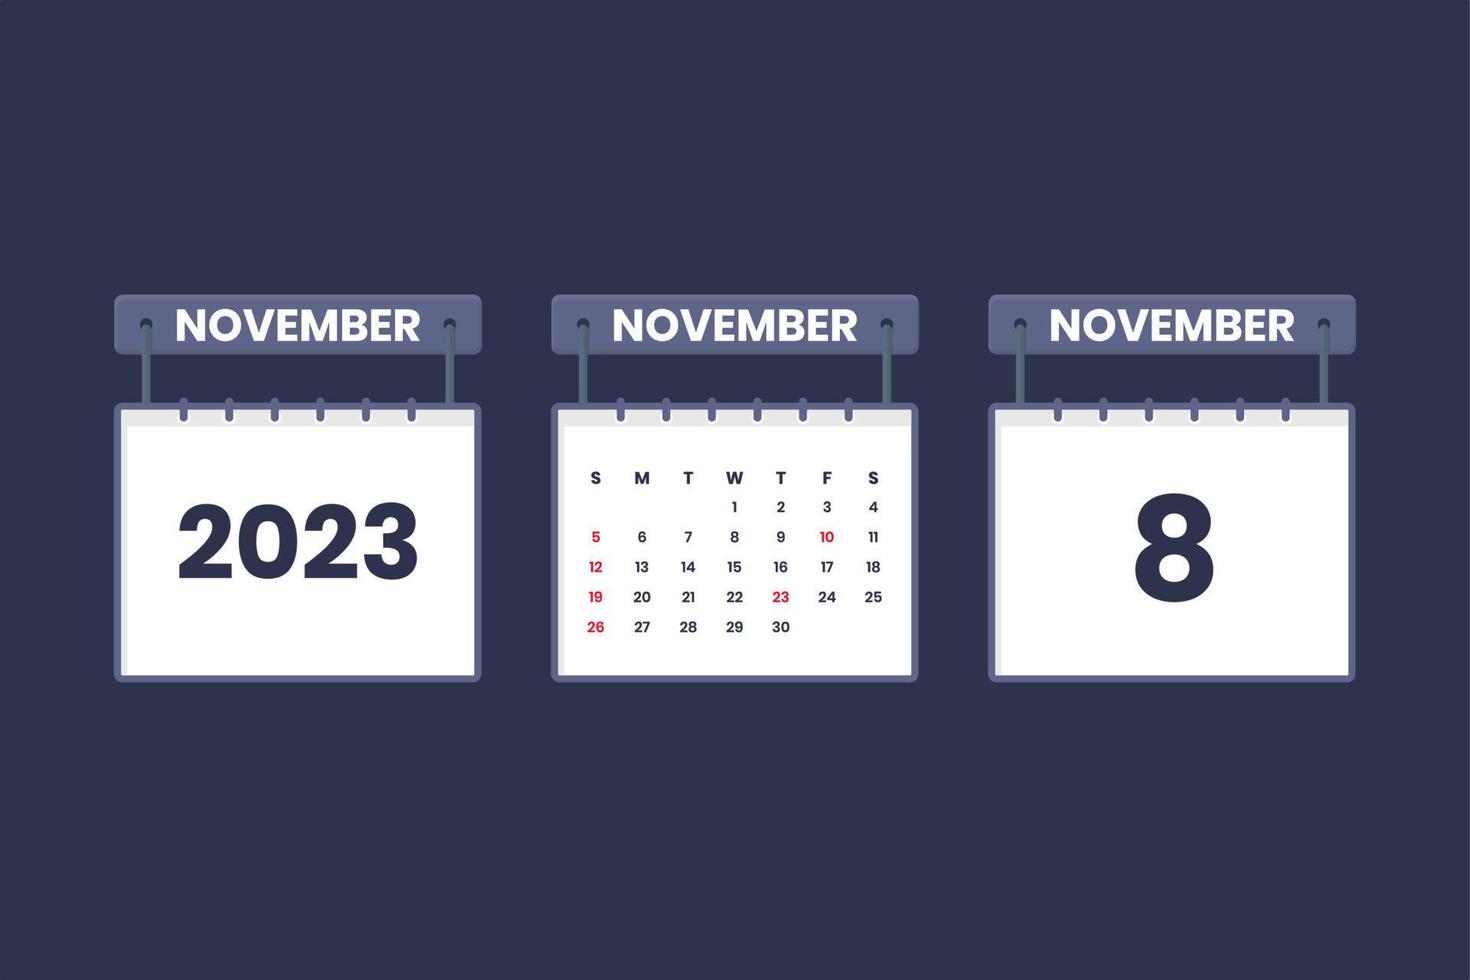 8 November 2023 calendar icon for schedule, appointment, important date concept vector